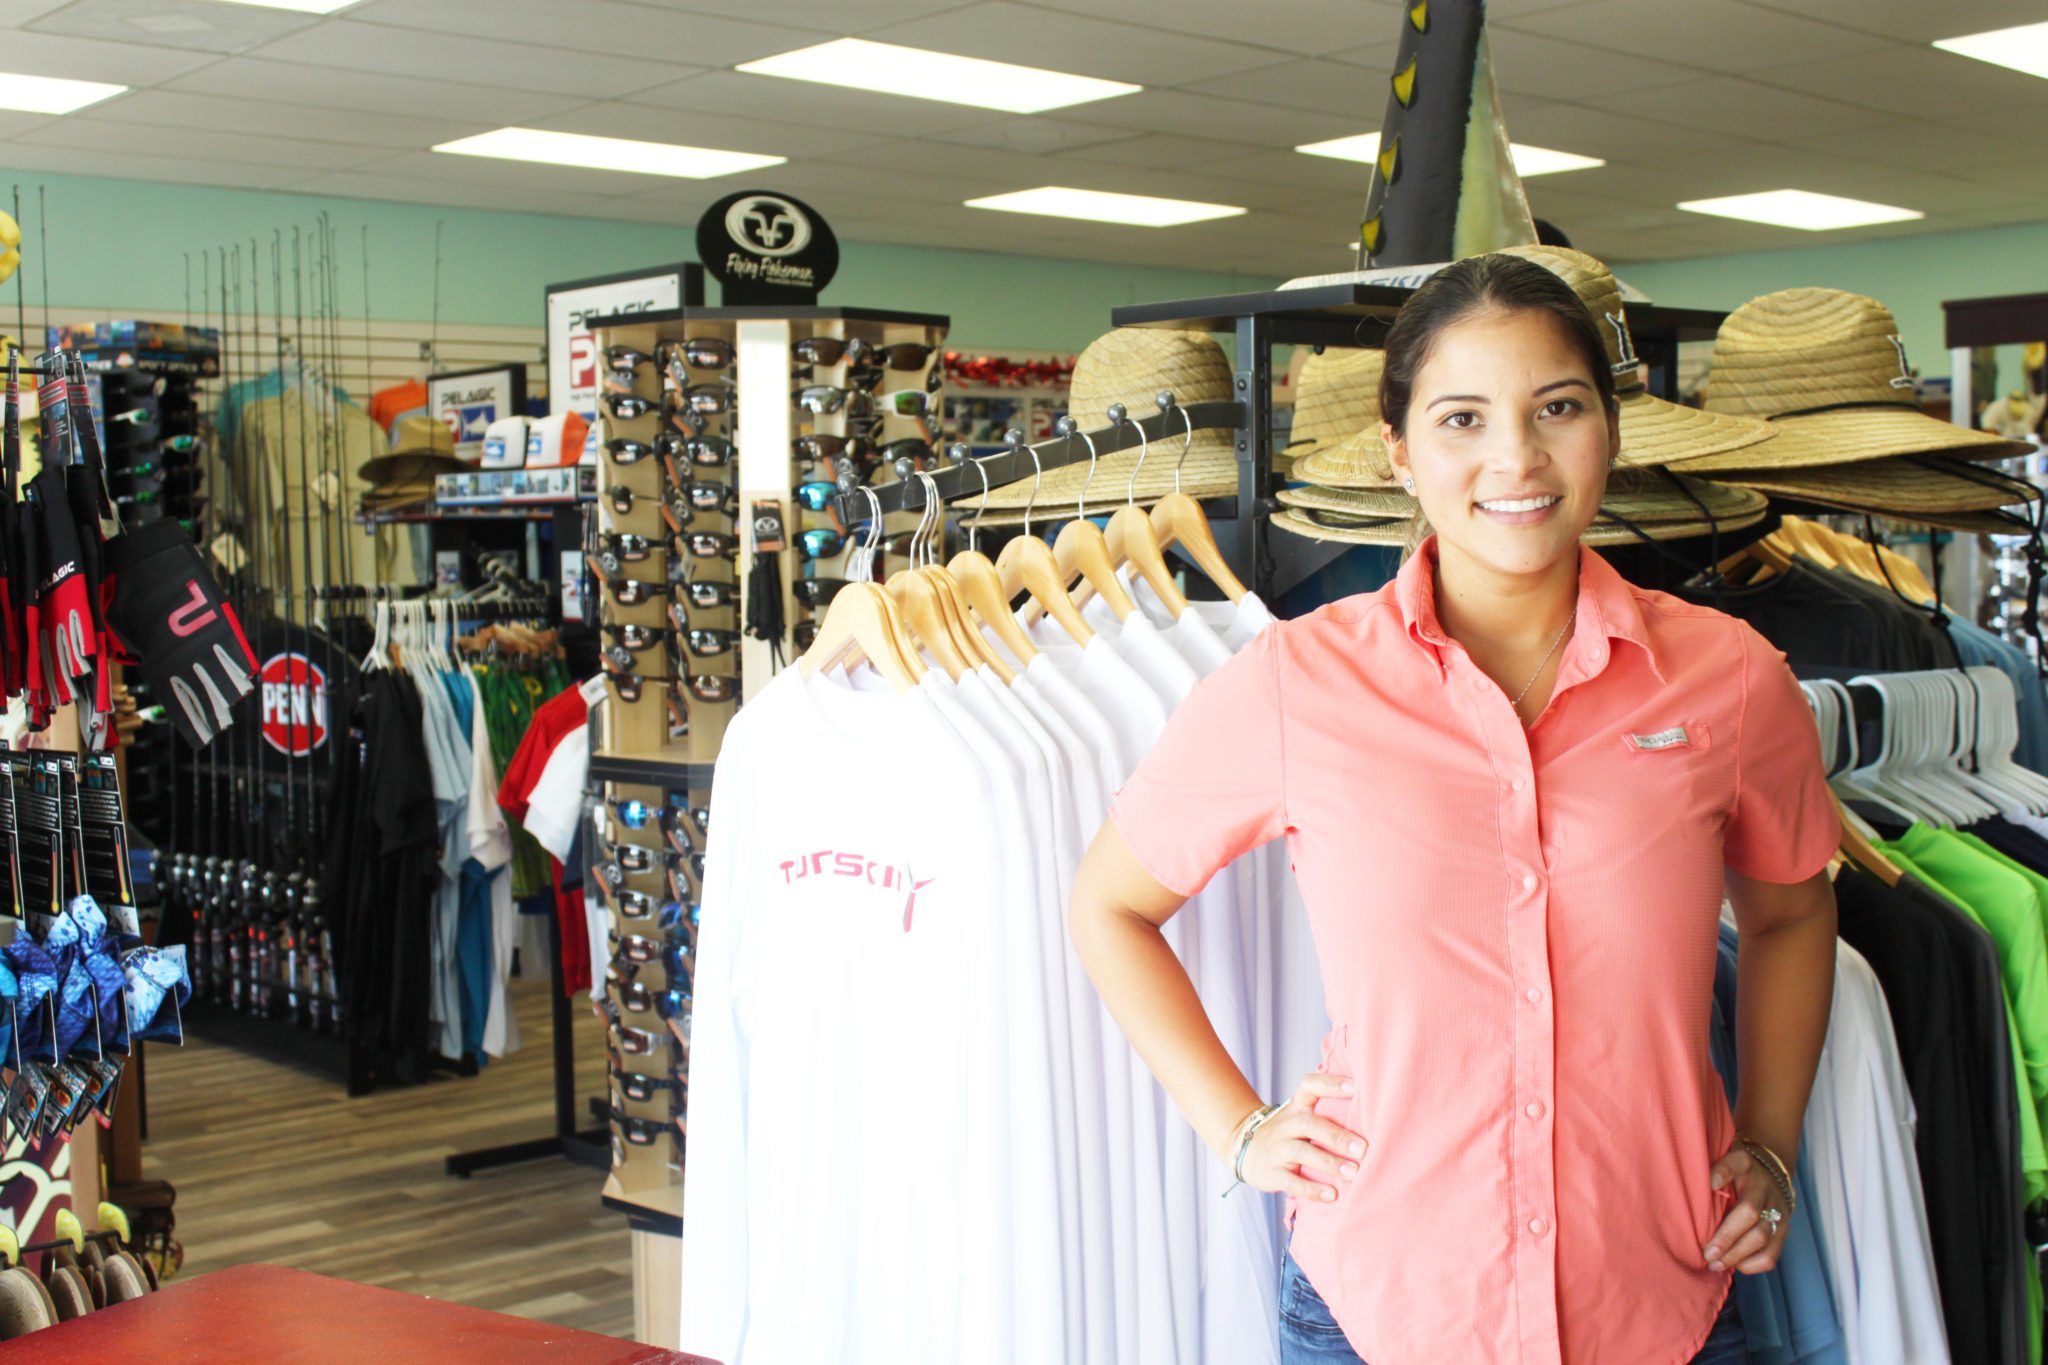 New shop features high-end fishing gear